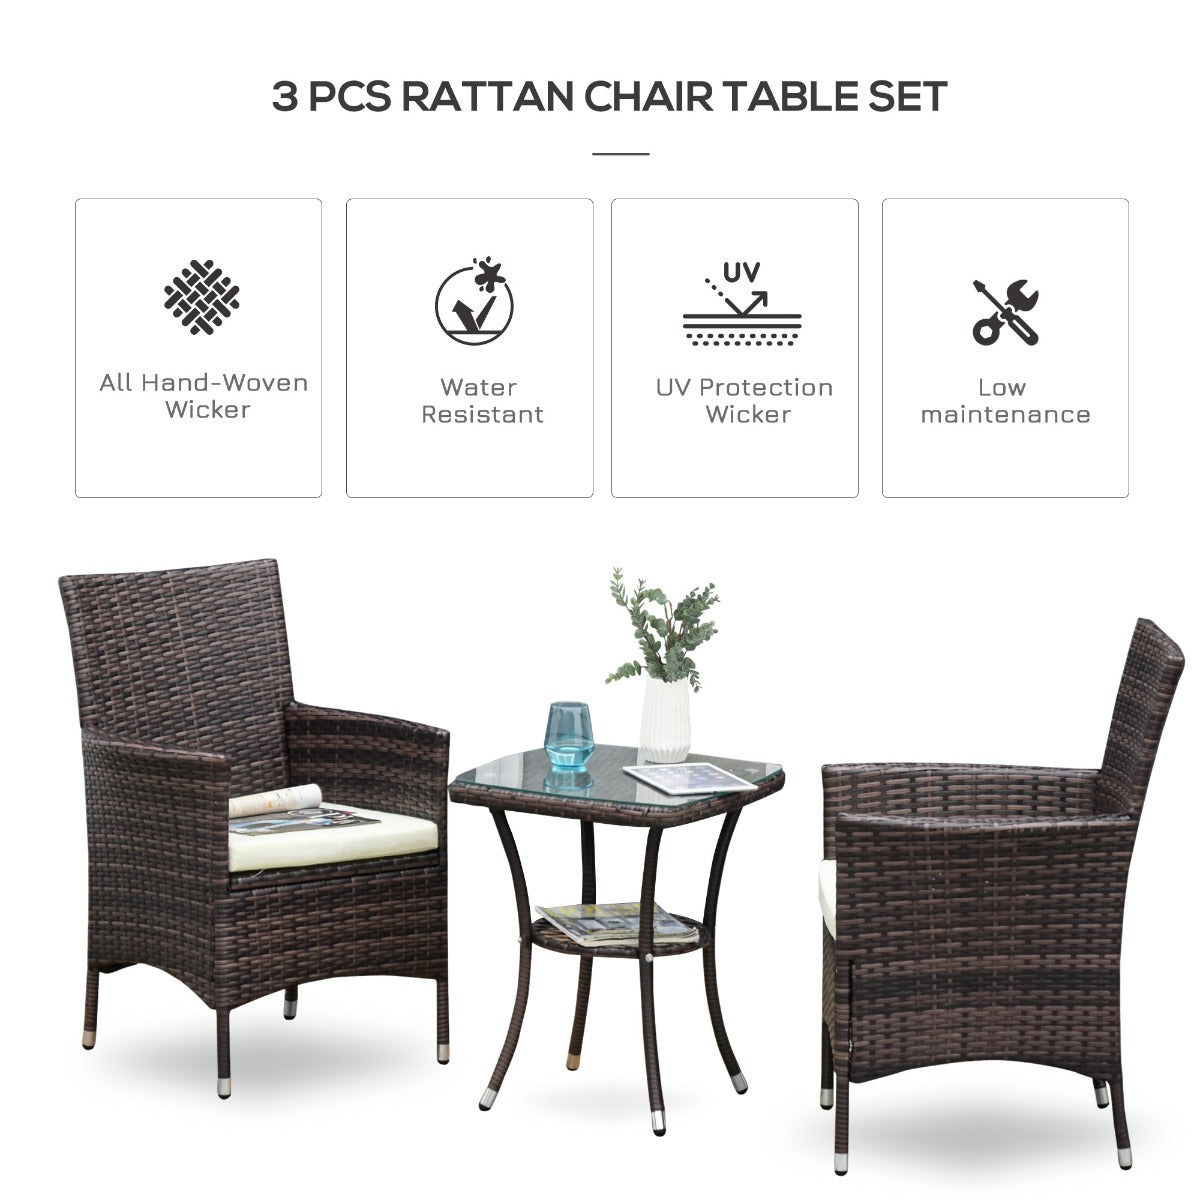 Outsunny 2 Seat Twin Rattan Bistro Chair and Table Set Brown